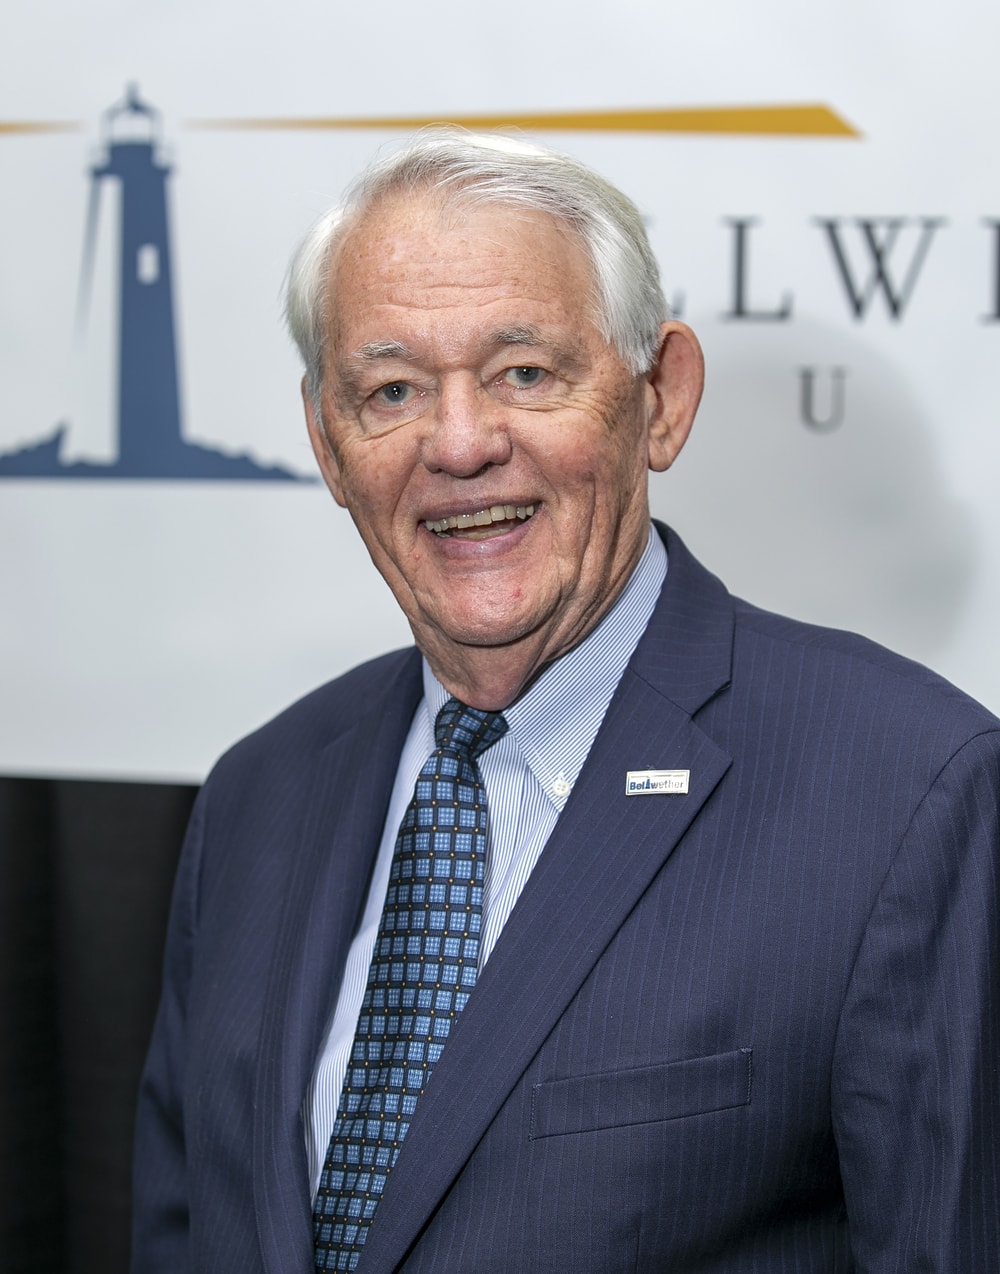 Classic and vintage Hall of Famer: Lee Boergadine (Bellwether Class of 2008), historically the second inductee into the Hall of Fame for Healthcare Supply Chain Leadership.